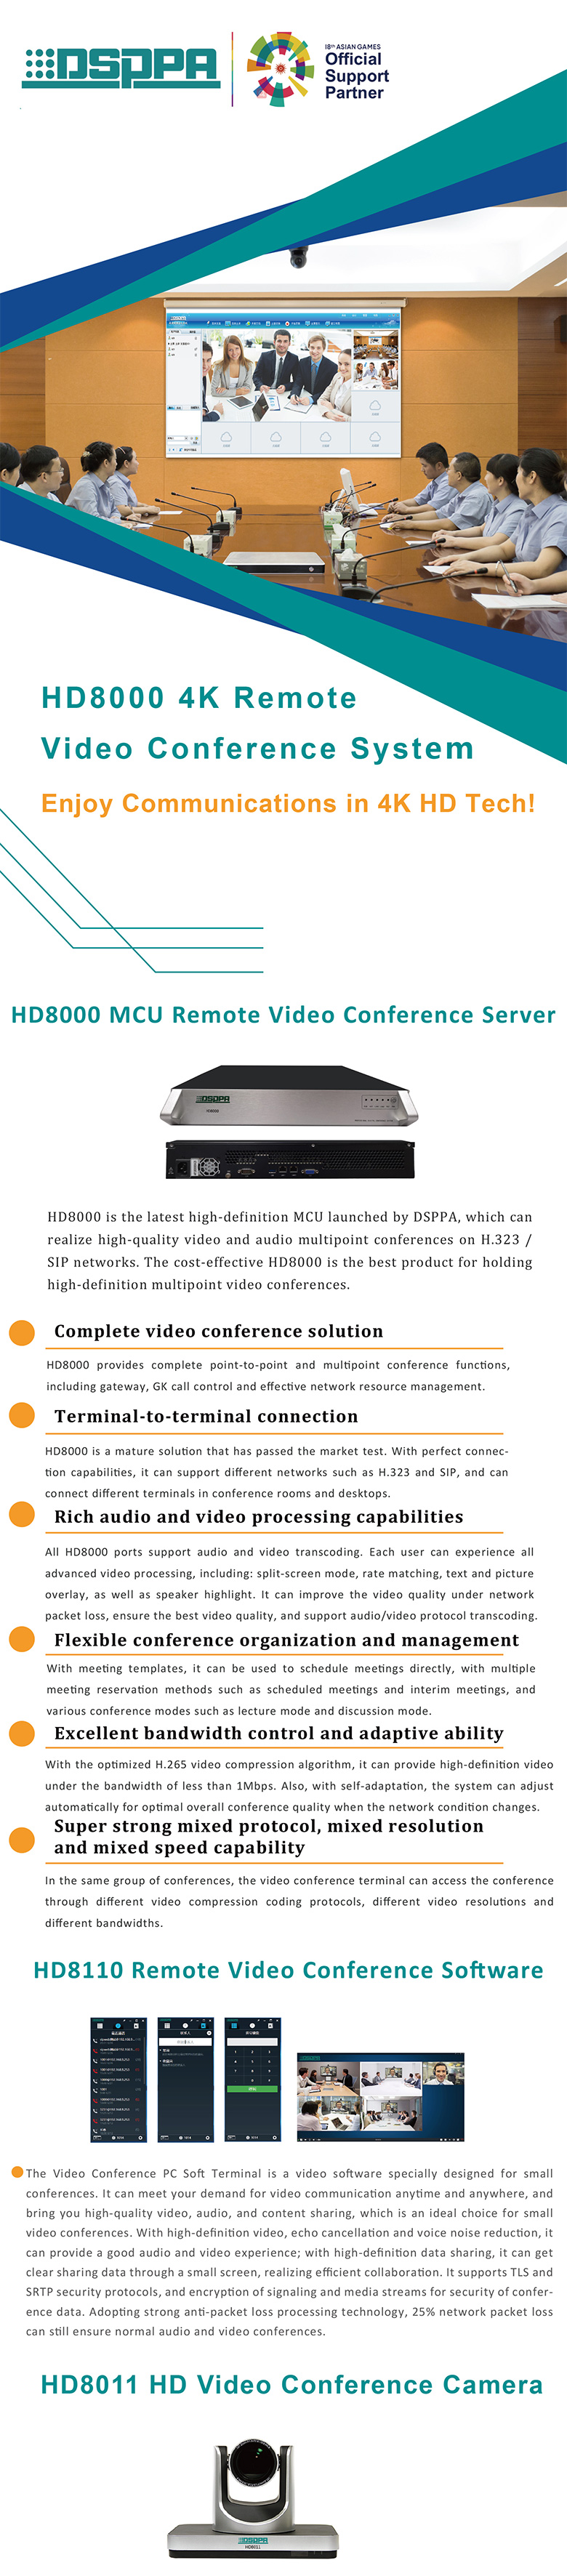 HD8000 4K Remote HD Video Conference System